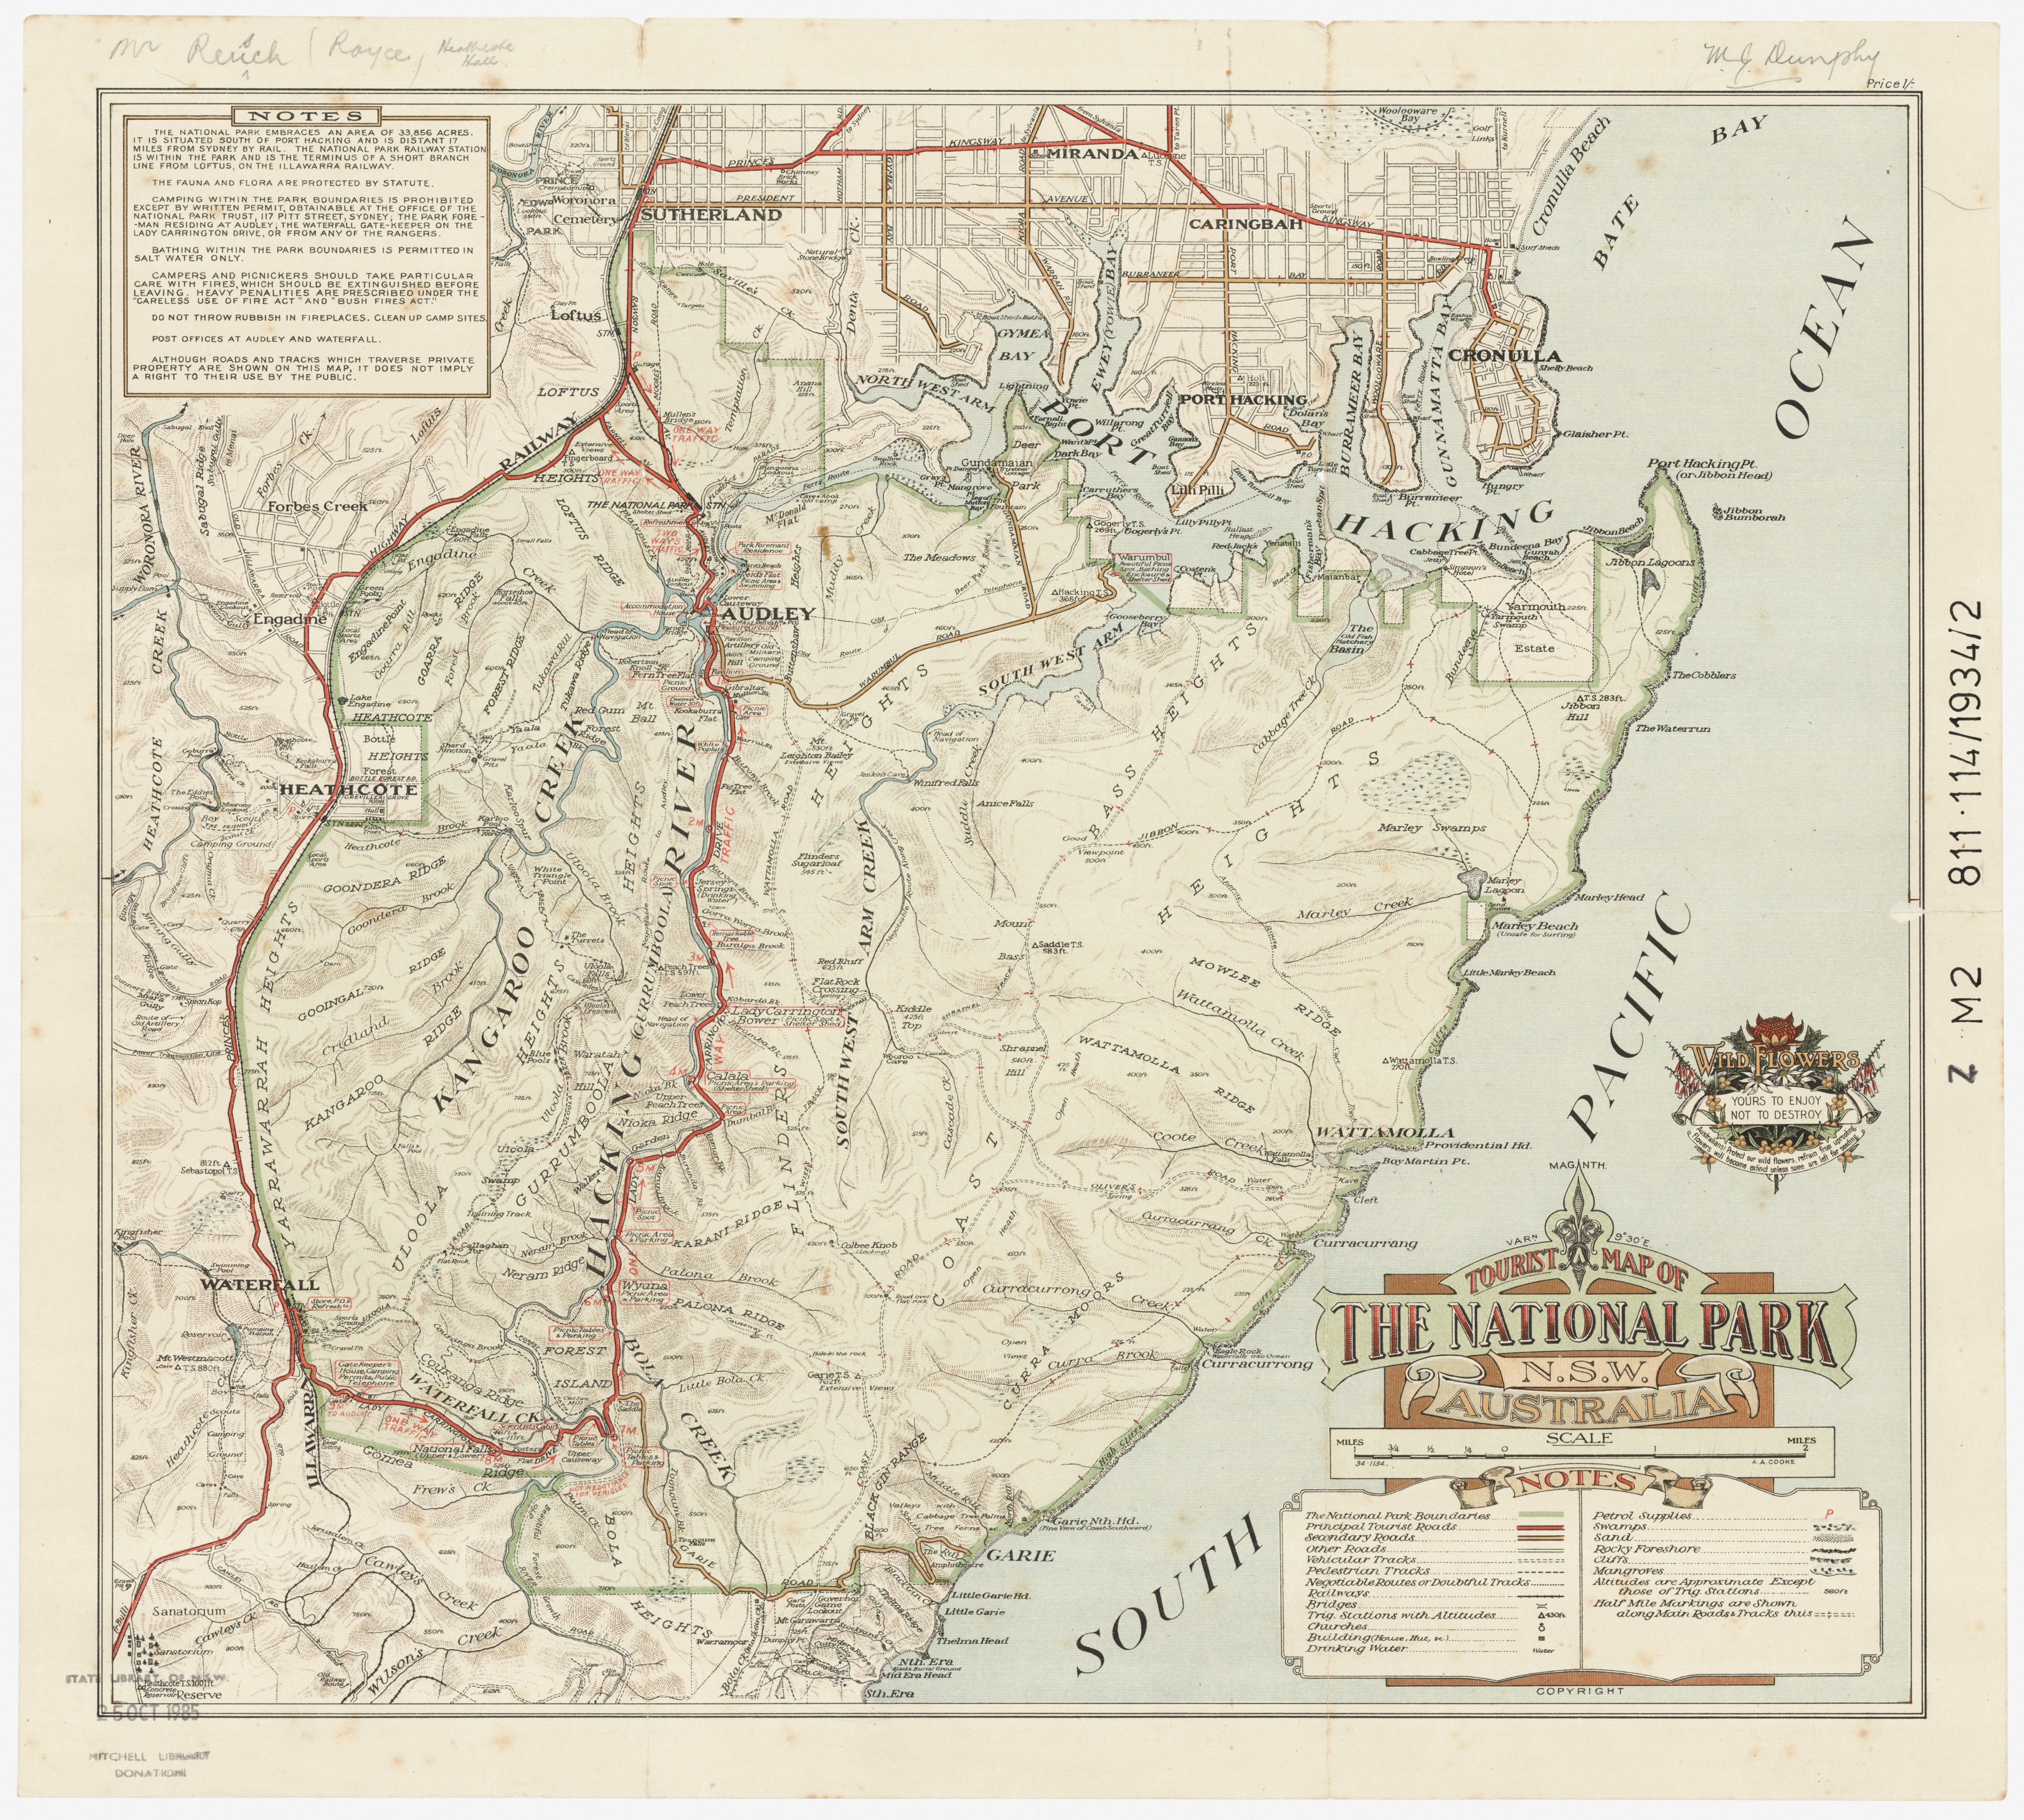 Tourist map of the National Park, N.S.W. Australia [cartographic material] / A.A. Cooke.